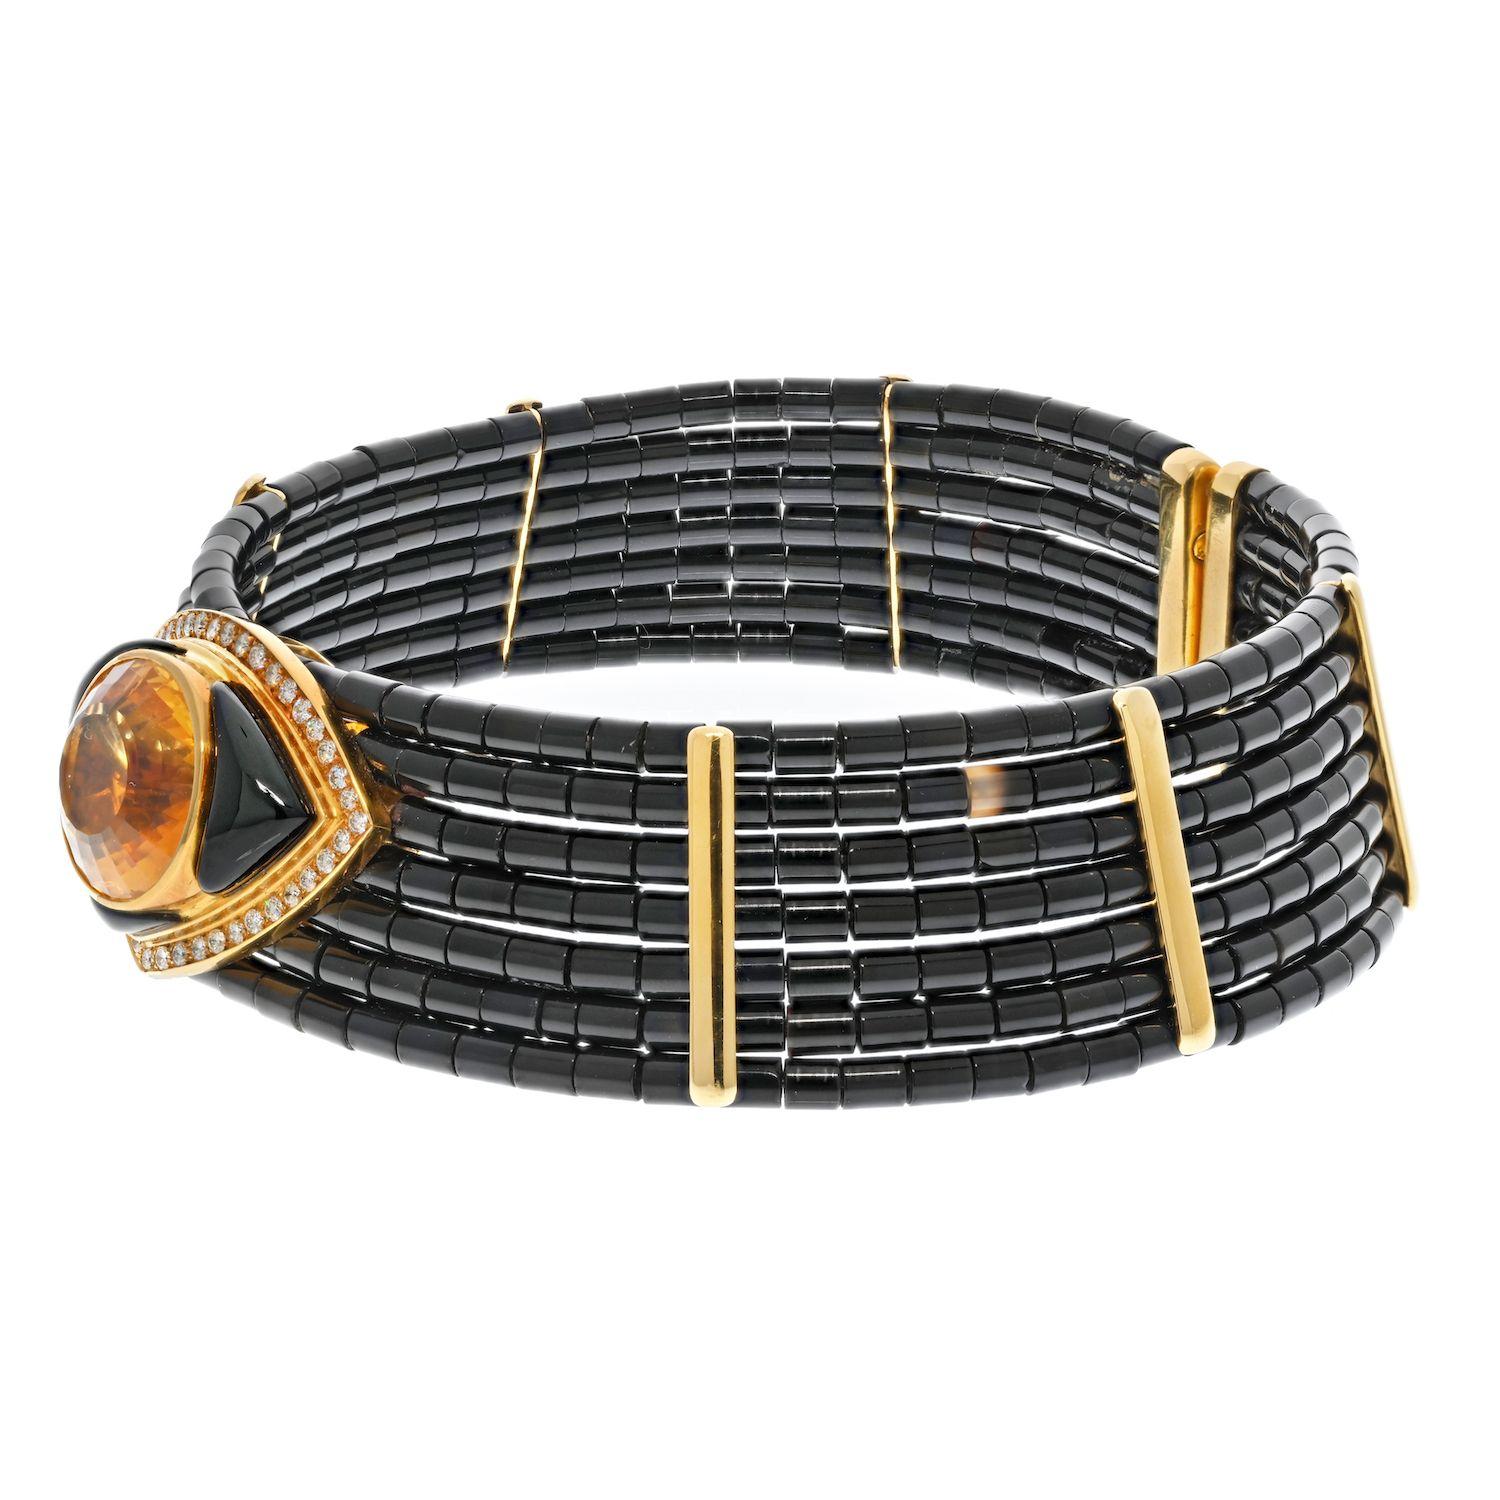 The 18k yellow gold choker is a beautiful and timeless piece of jewelry. Its dramatic style and luxurious design make it a perfect piece to add to any collection. Very unusual this elegant estate choker is a perfect piece for someone who has a long